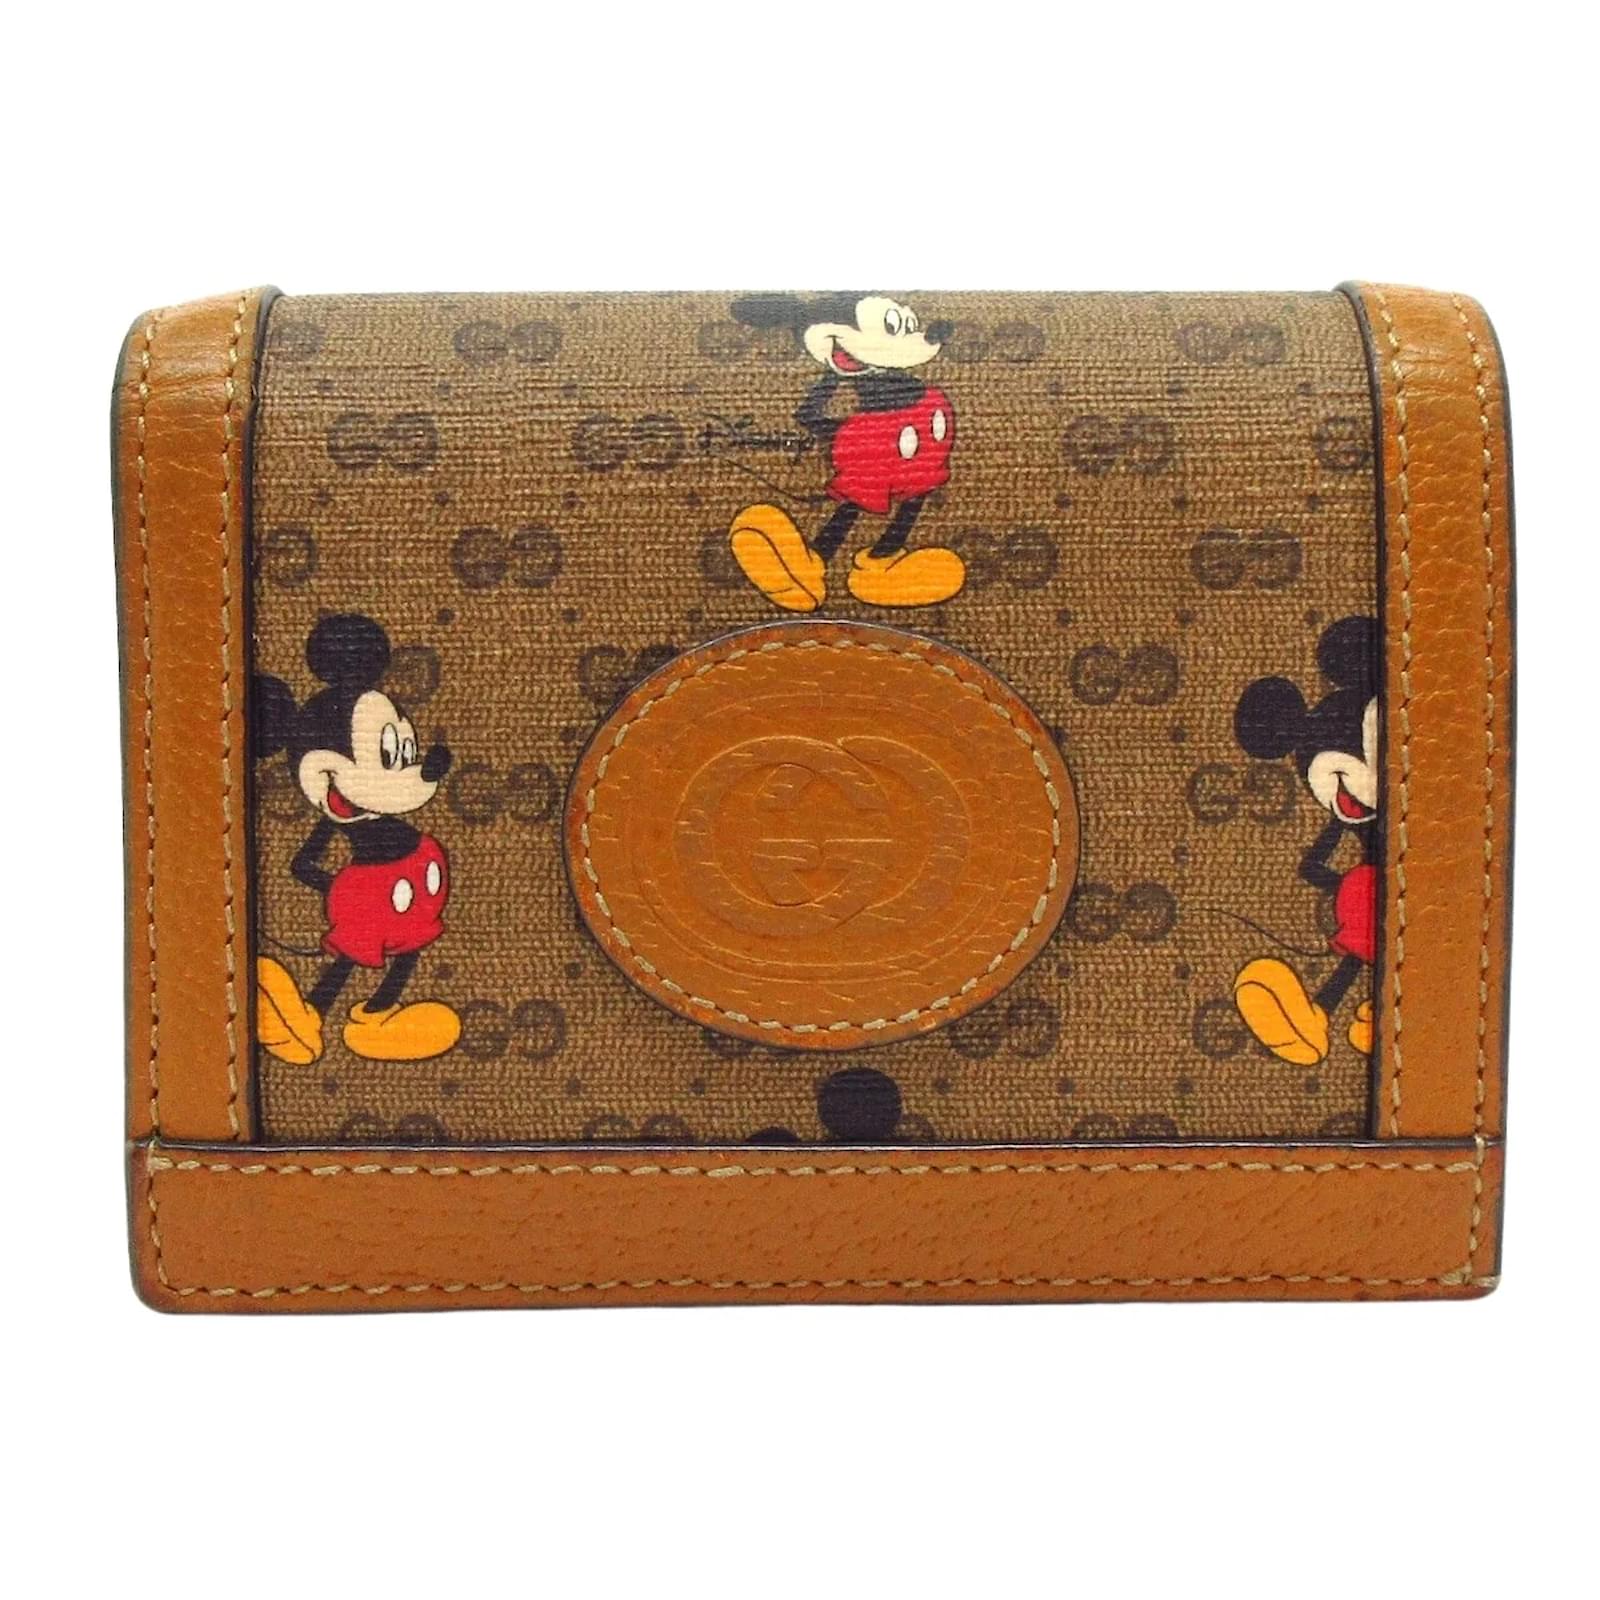 Officially Licensed Disney Mickey And Minnie Love Handbag: Disney Mickey &  Minnie 'Love Story' Handbag